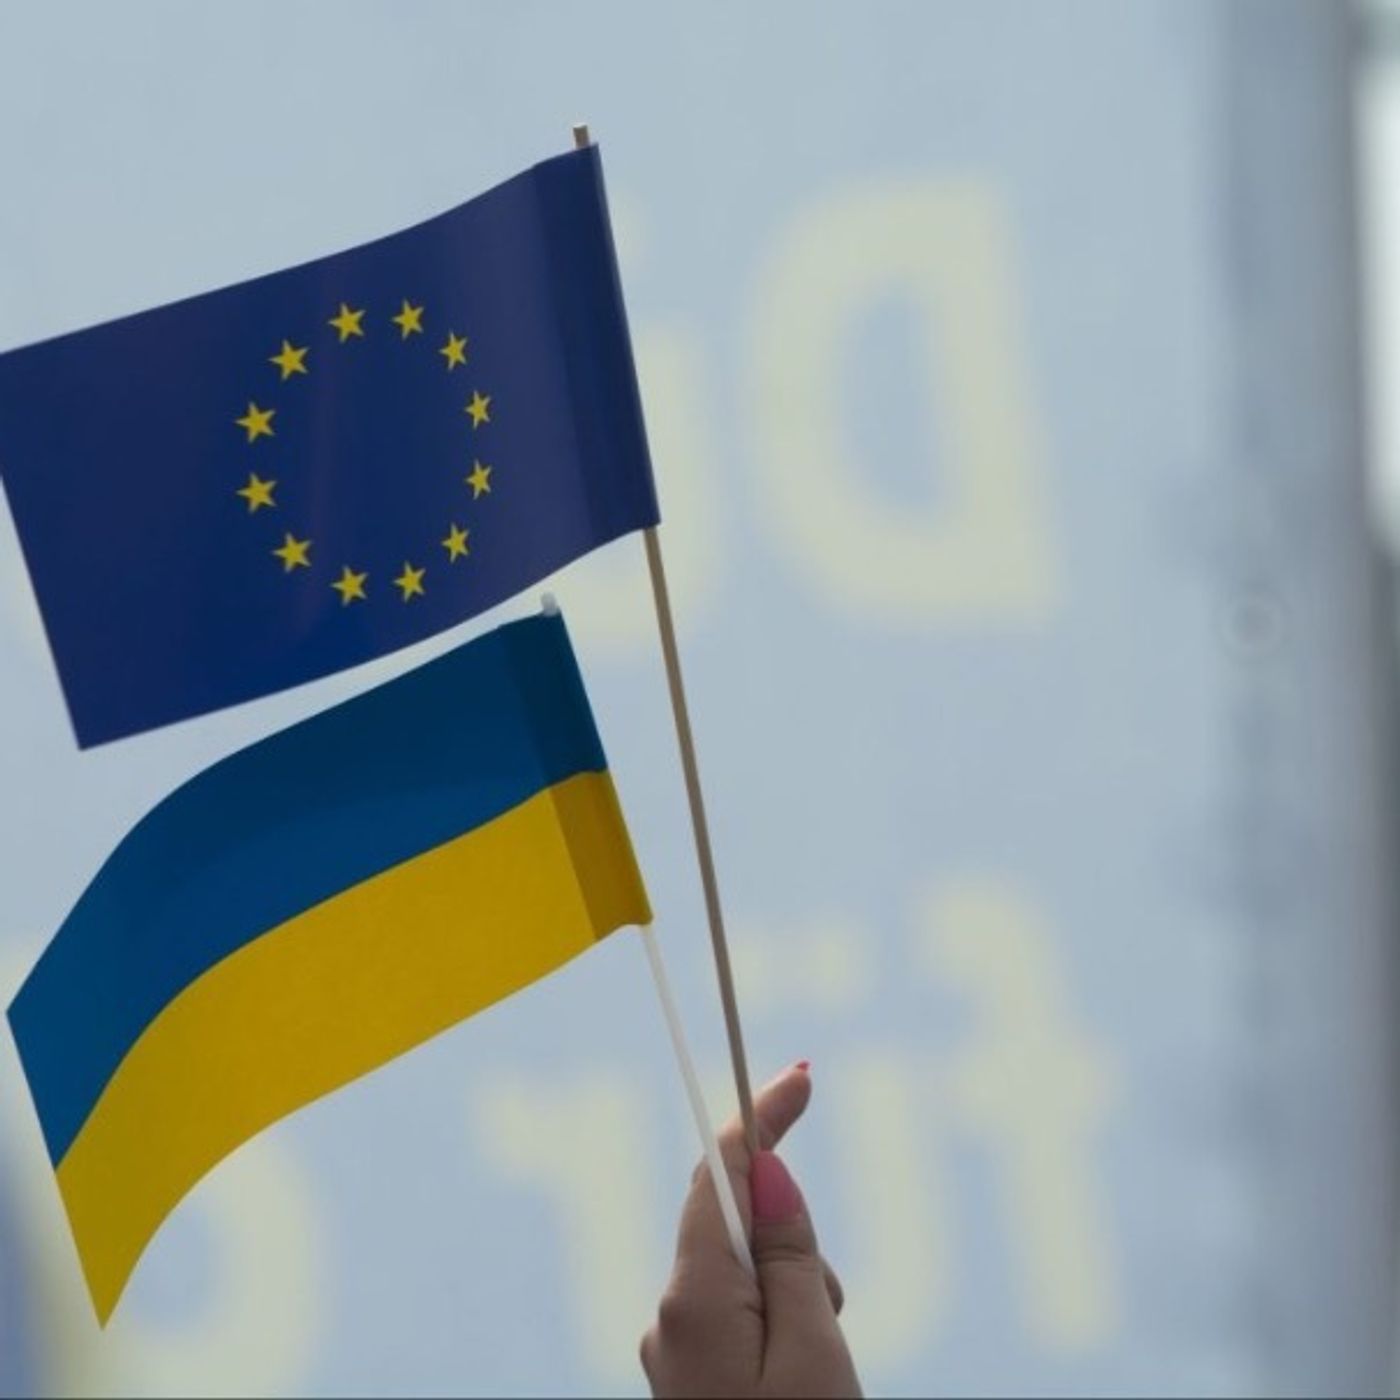 161: The European Response to the War in Ukraine: A Legal Analysis